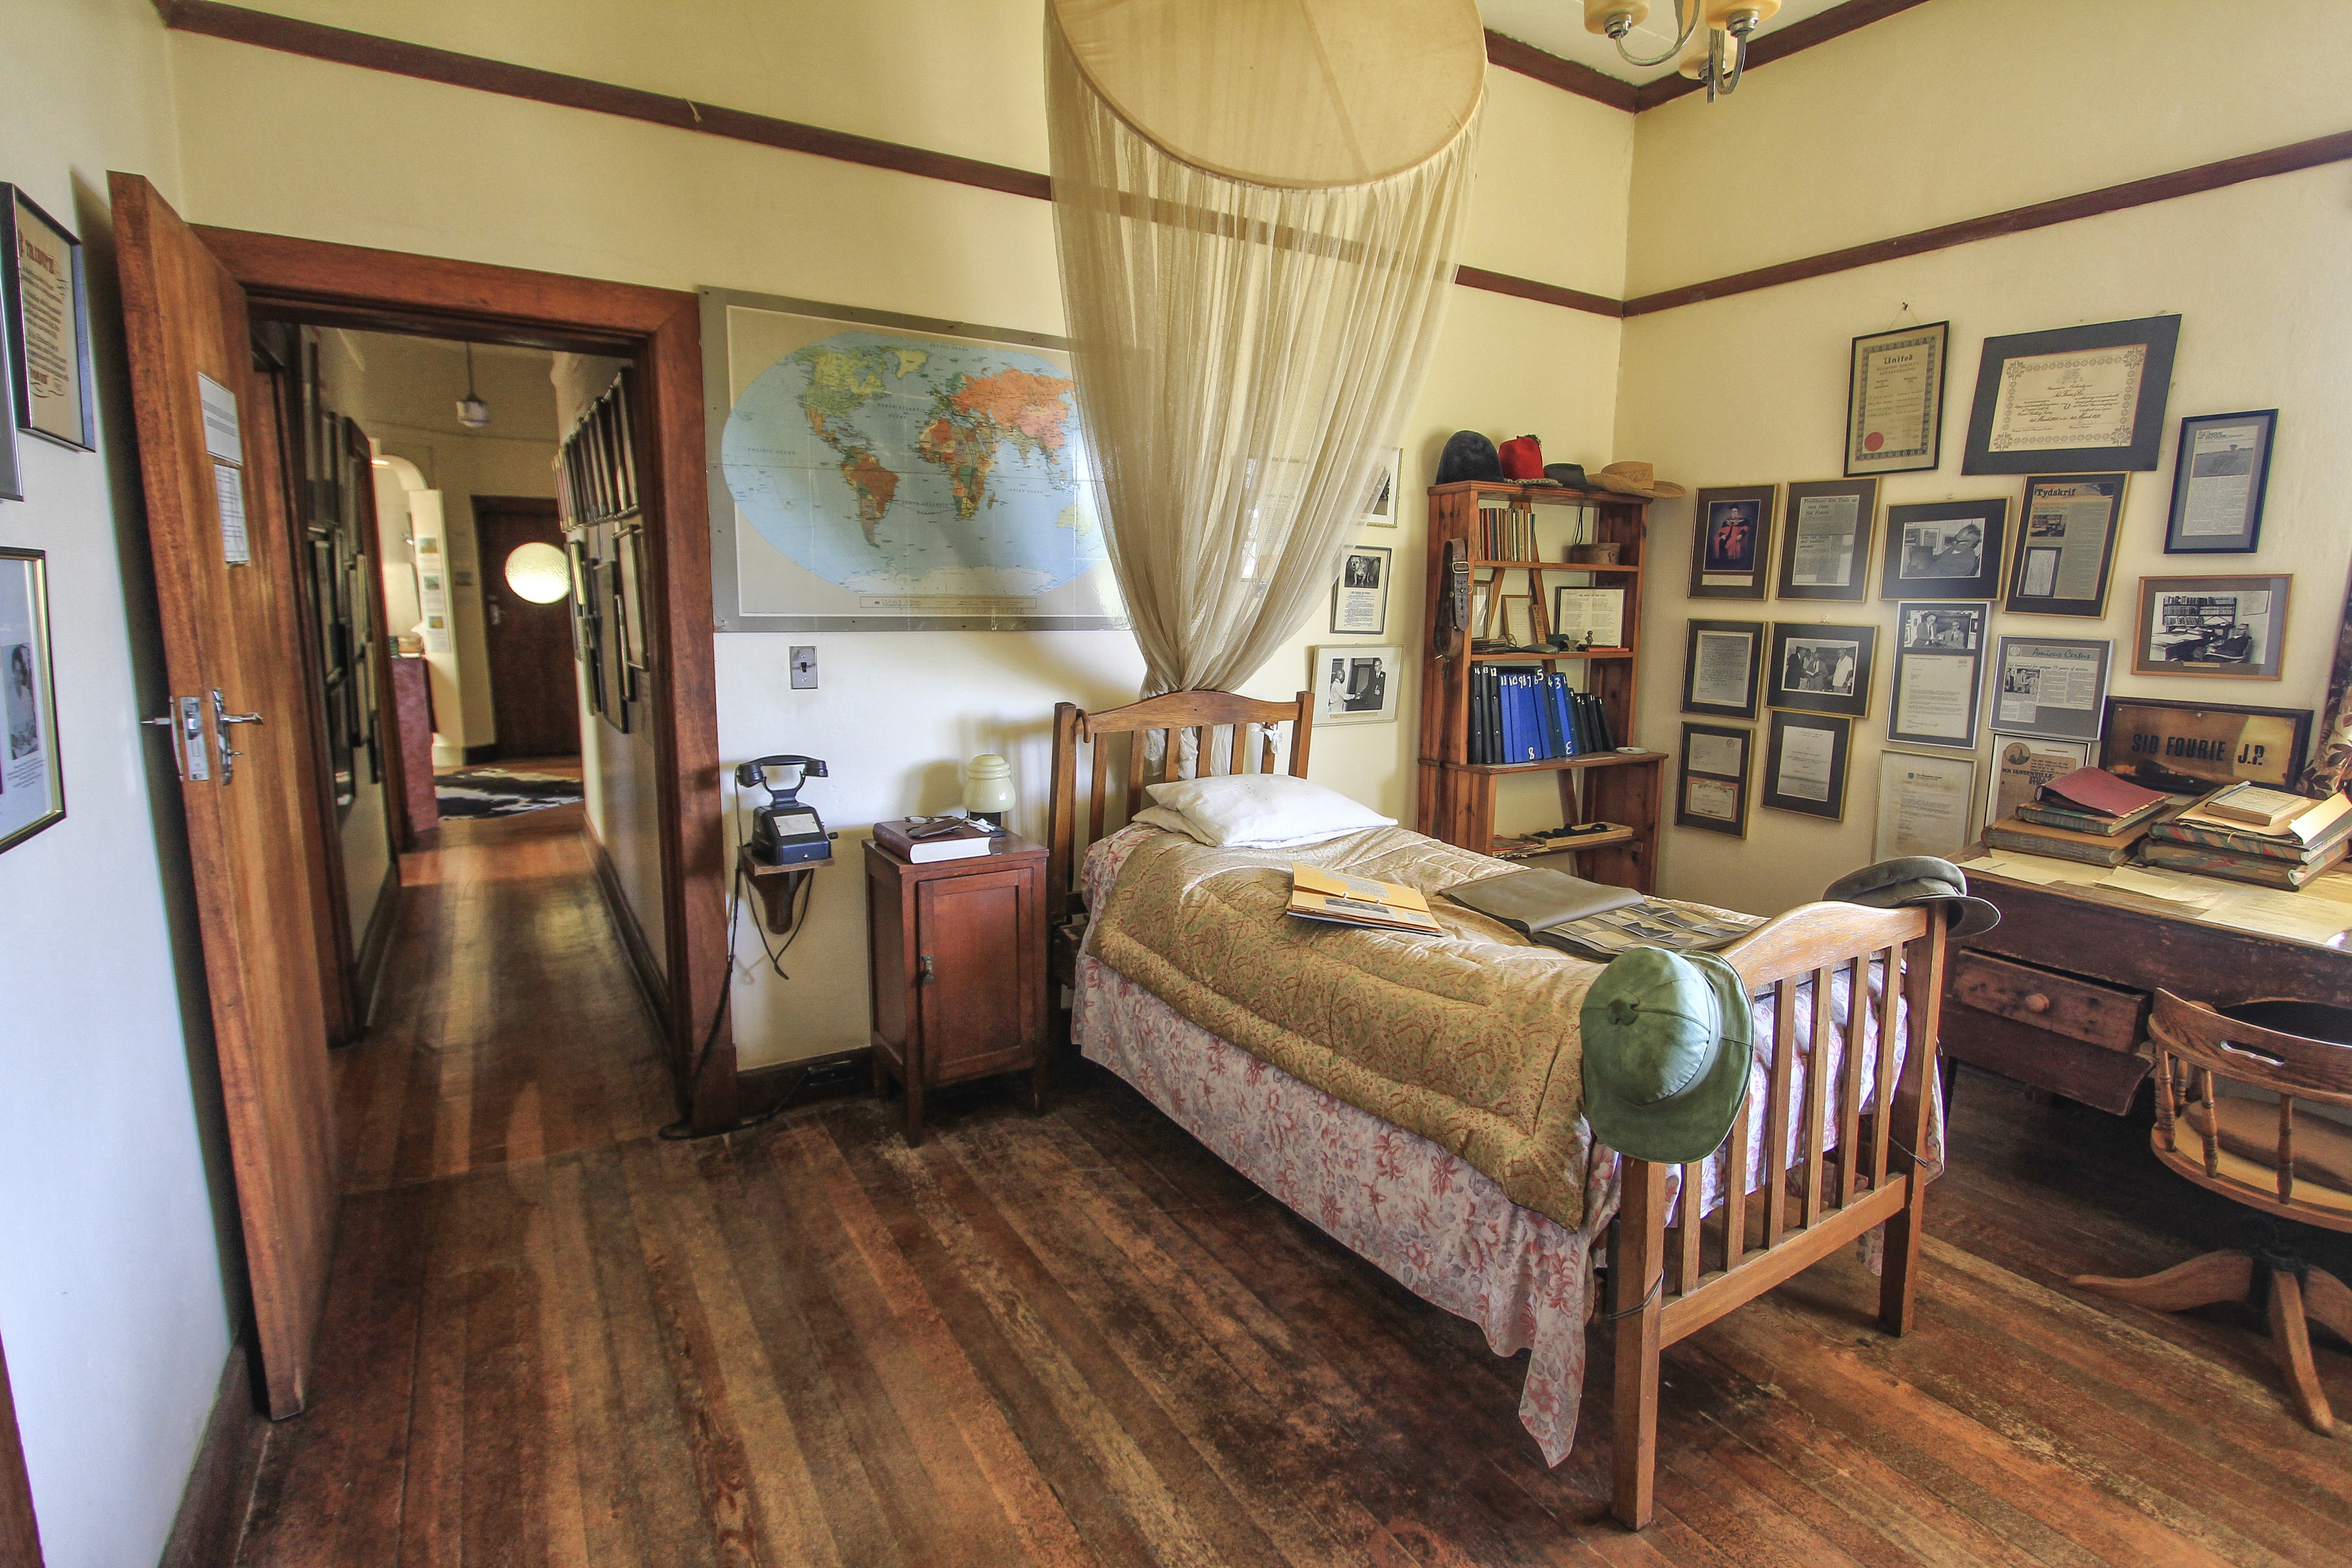 Sid Fourie’s bedroom, preserved down to the last detail. Image: Chris Marais